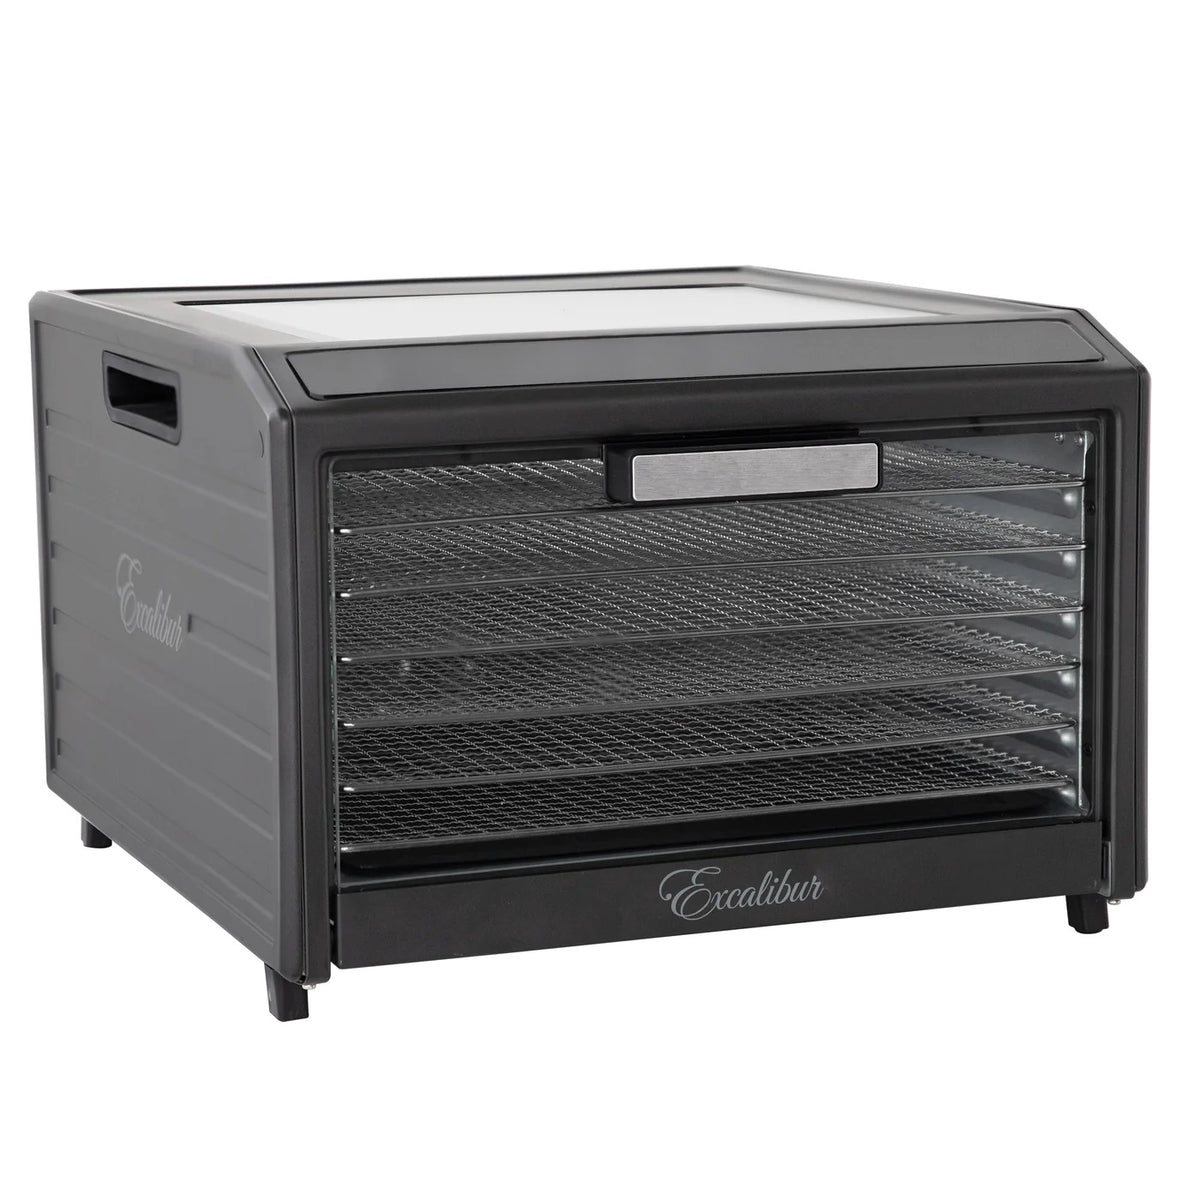 Excalibur DH06SS dehydrator with clear door closed.